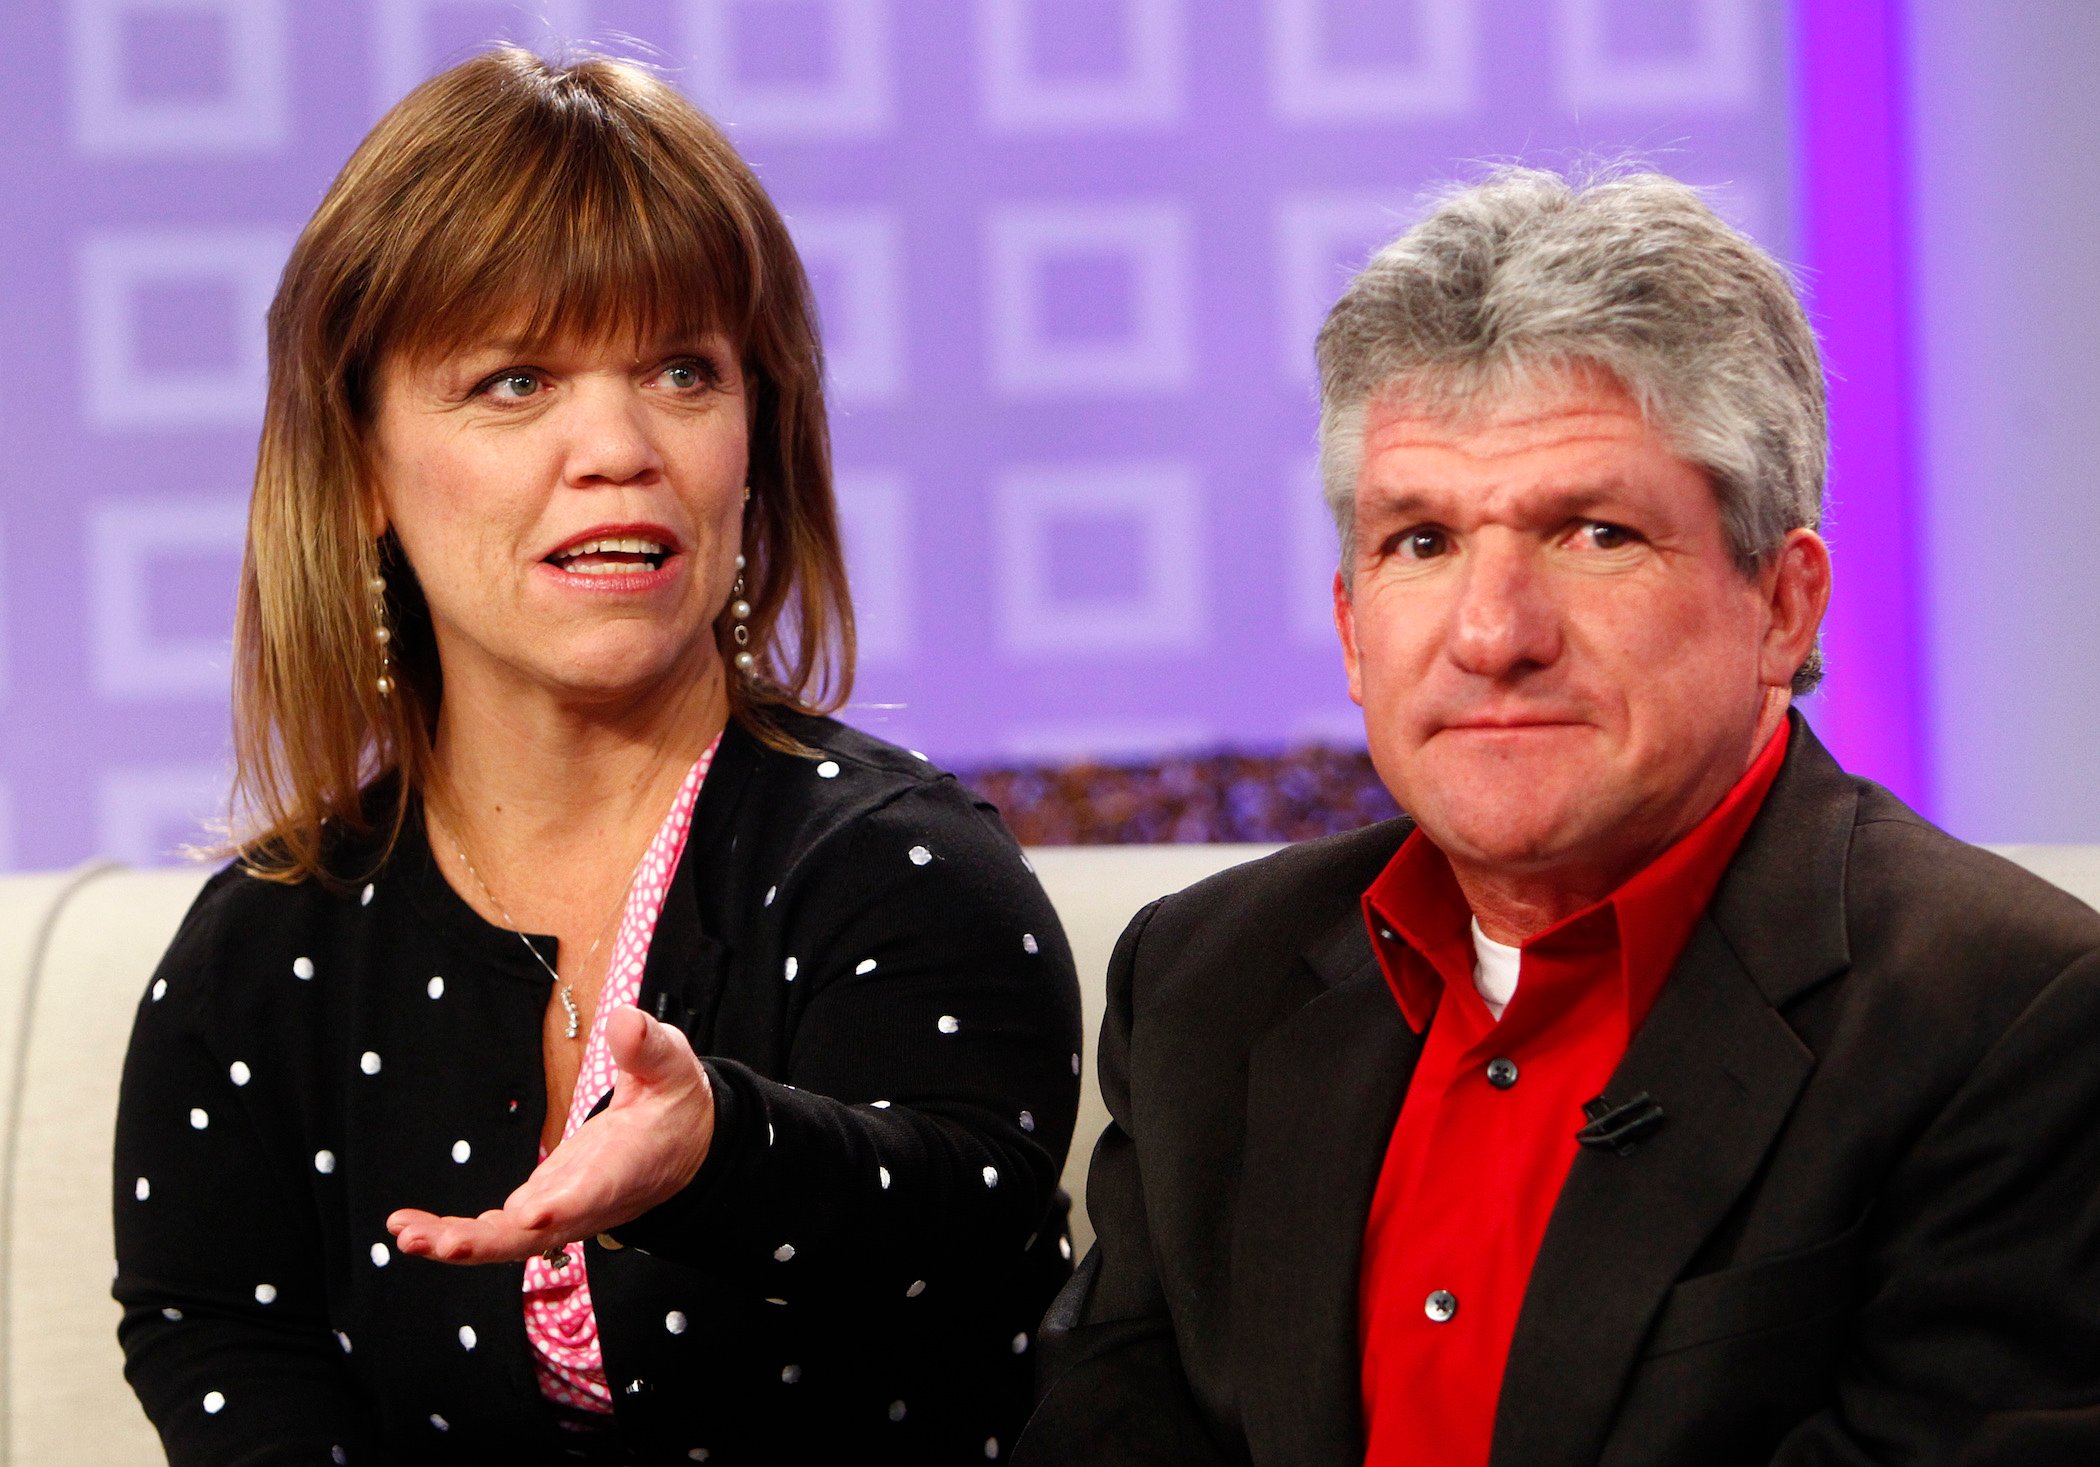 Amy Roloff and Matt Roloff from 'Little People, Big World' sitting next to each other on a couch against a purple background